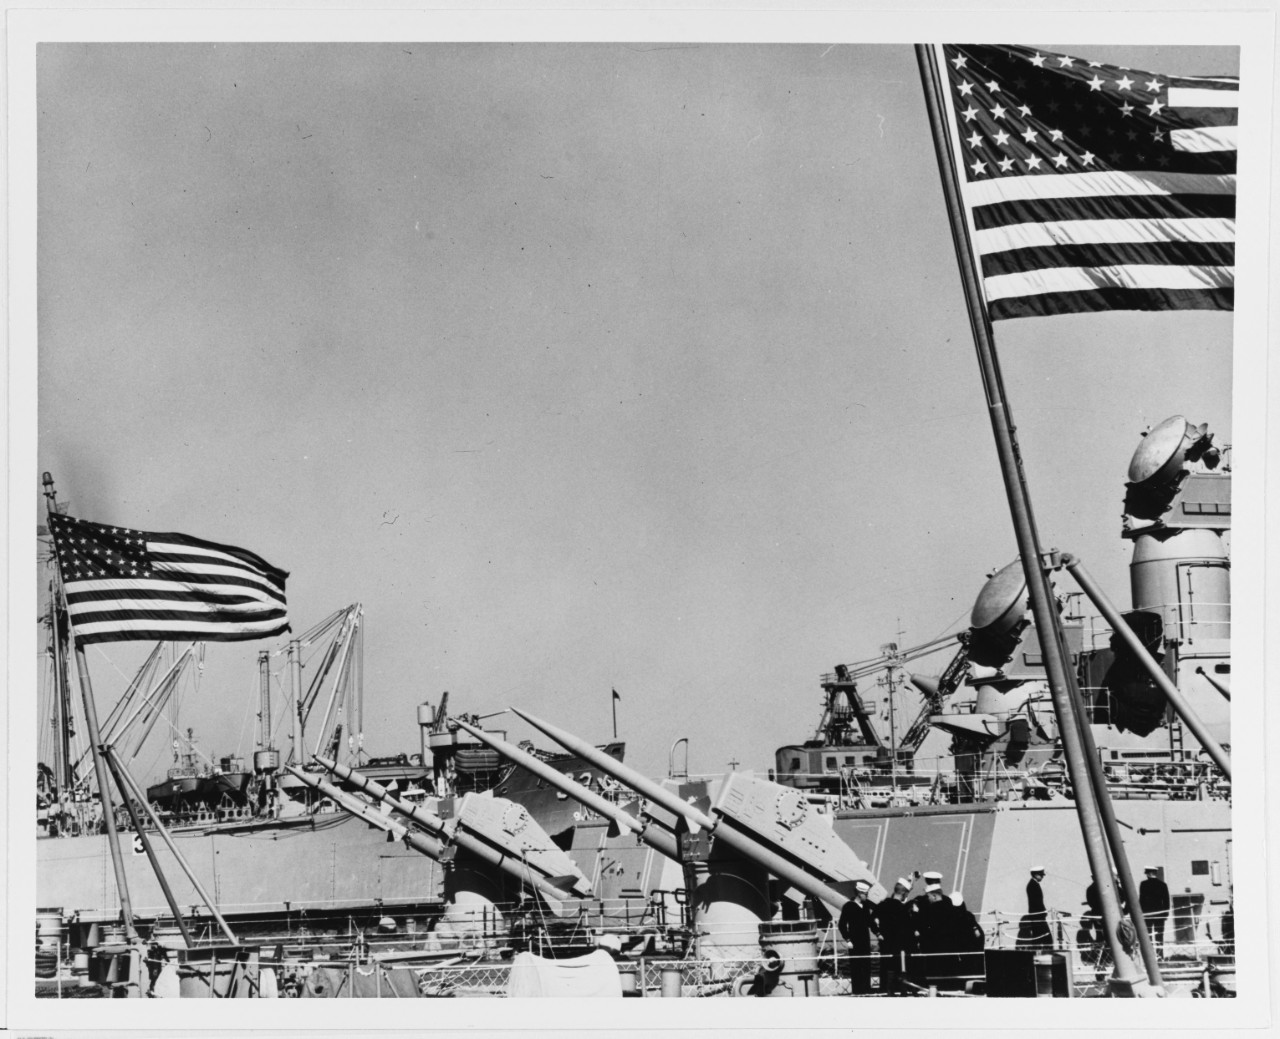 Terrier Missile aboard DLG's tied up at San Diego Harbor, California. American flags.  5/19/1961